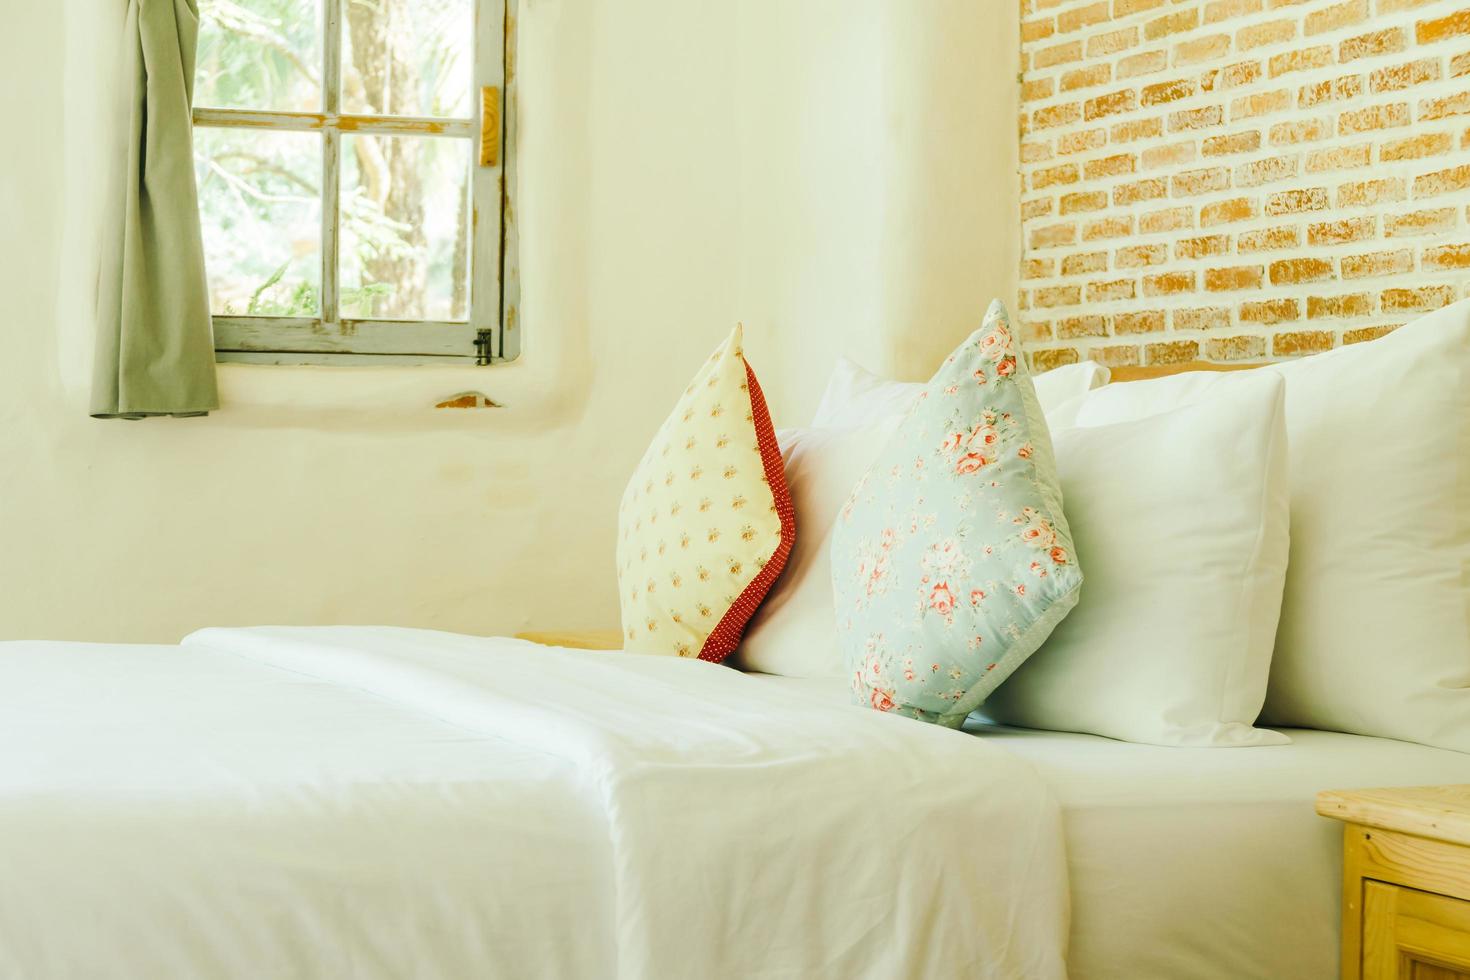 Pillow on bed decoration in bedroom interior photo